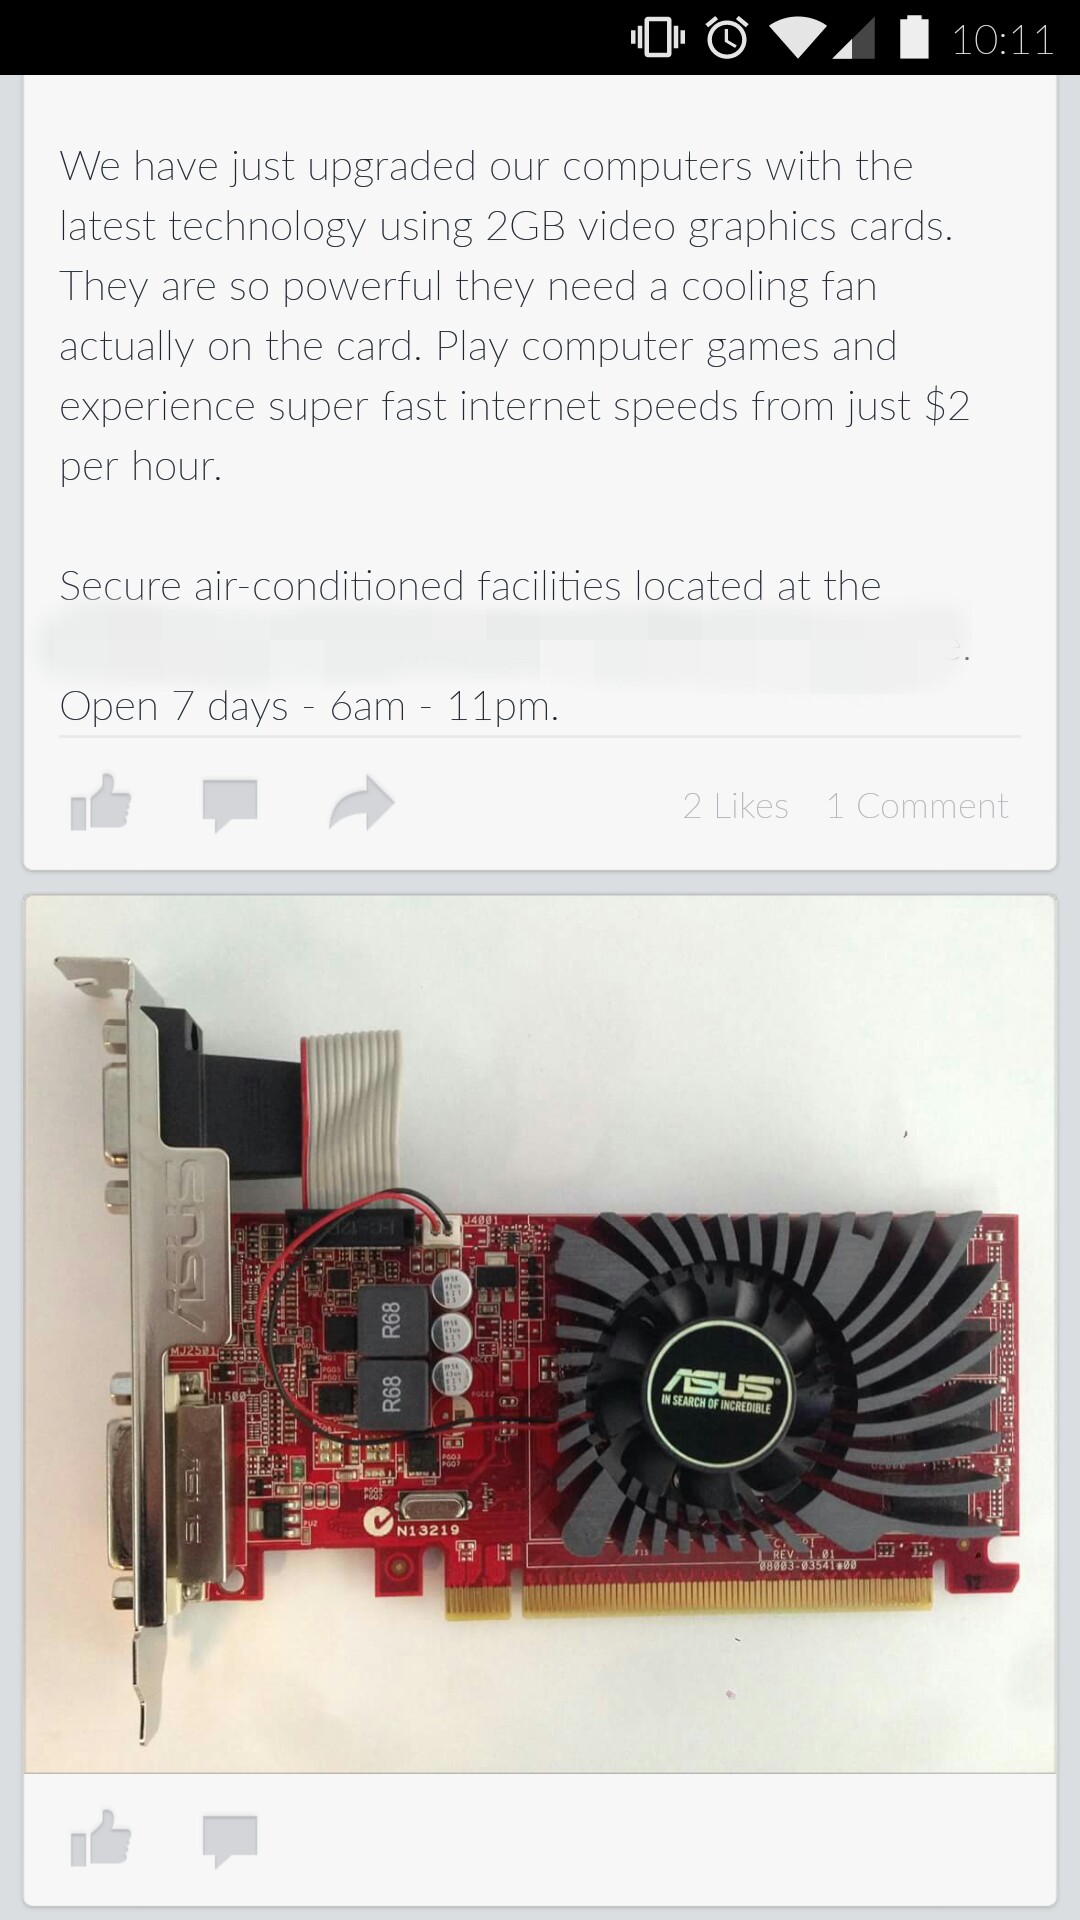 A local Internet Cafe just posted this. "Latest technology"